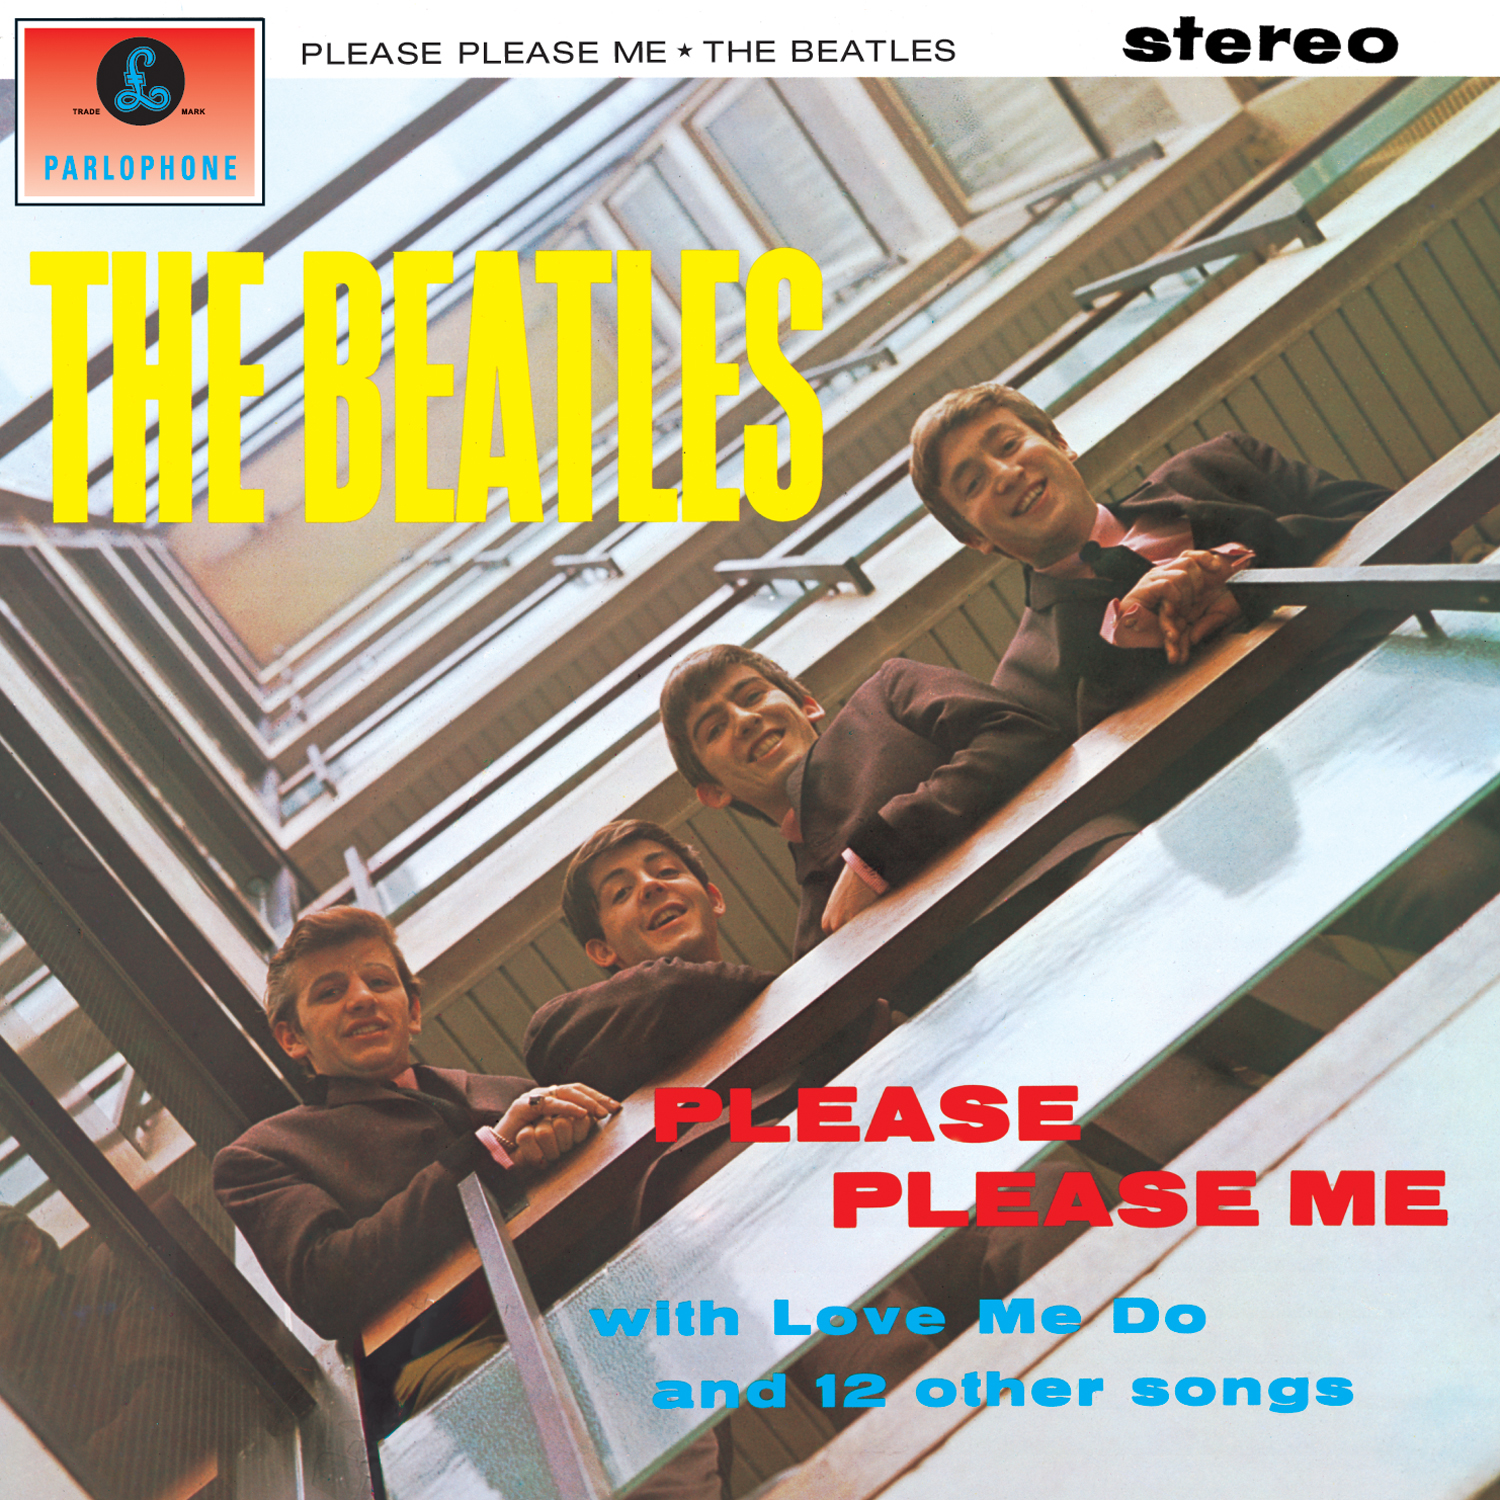 "Please Please Me" by The Beatles album cover. Members of the band are in a stairwell looking over and down a couple levels while the camera is shooting up the stairwell